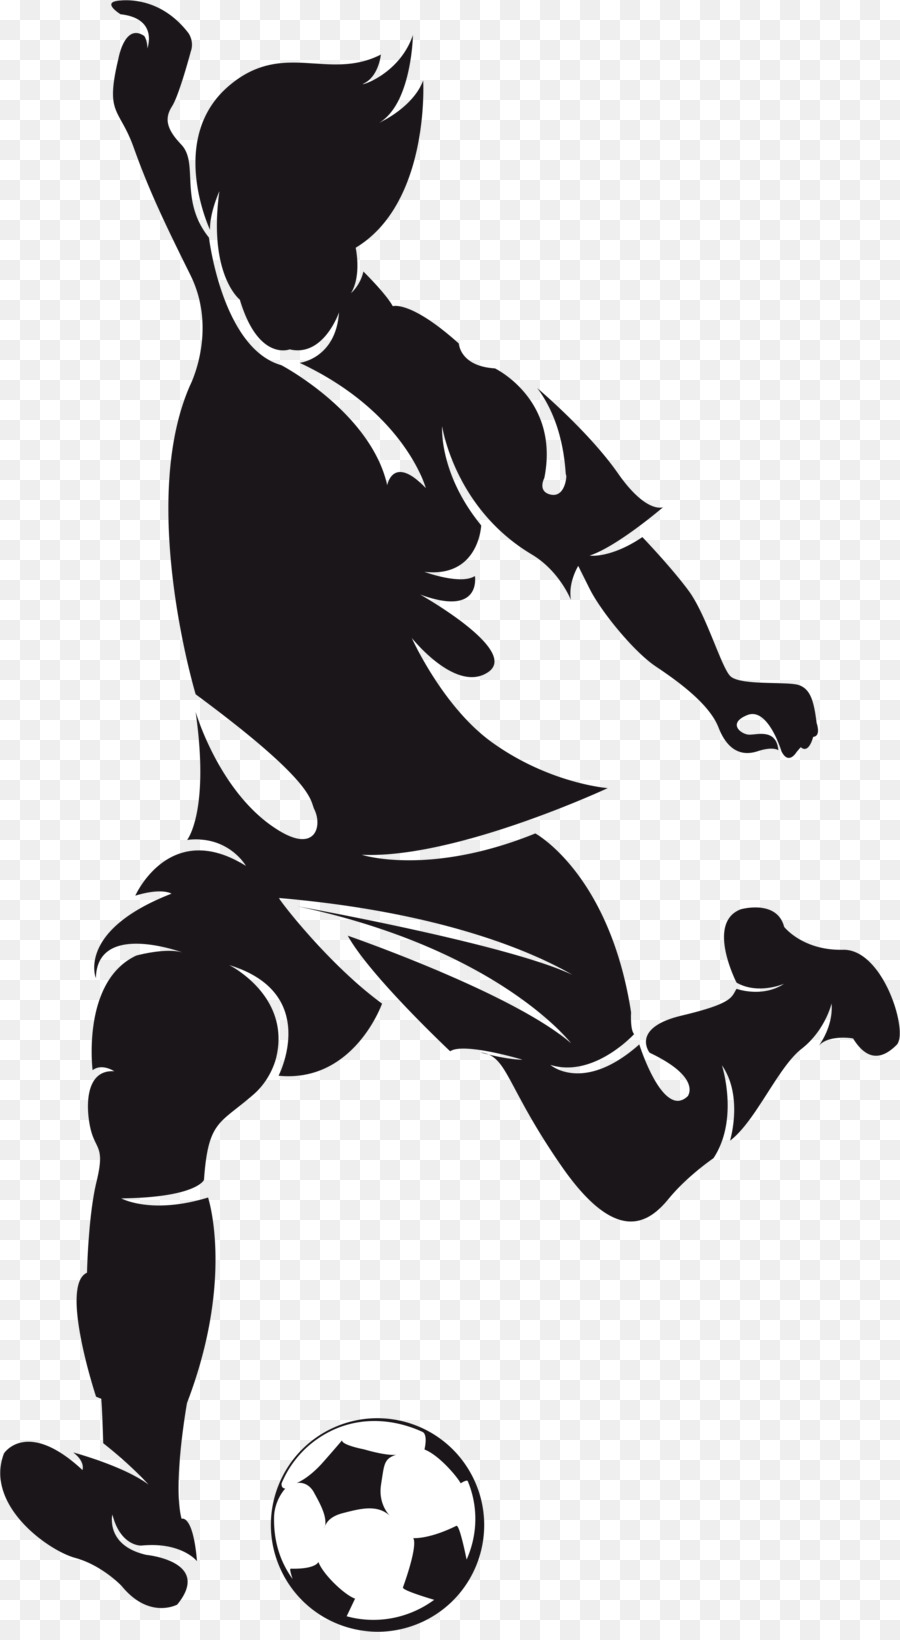 Football player American football Clip art - Soccer Player png download - 2606*4726 - Free Transparent Football Player png Download.